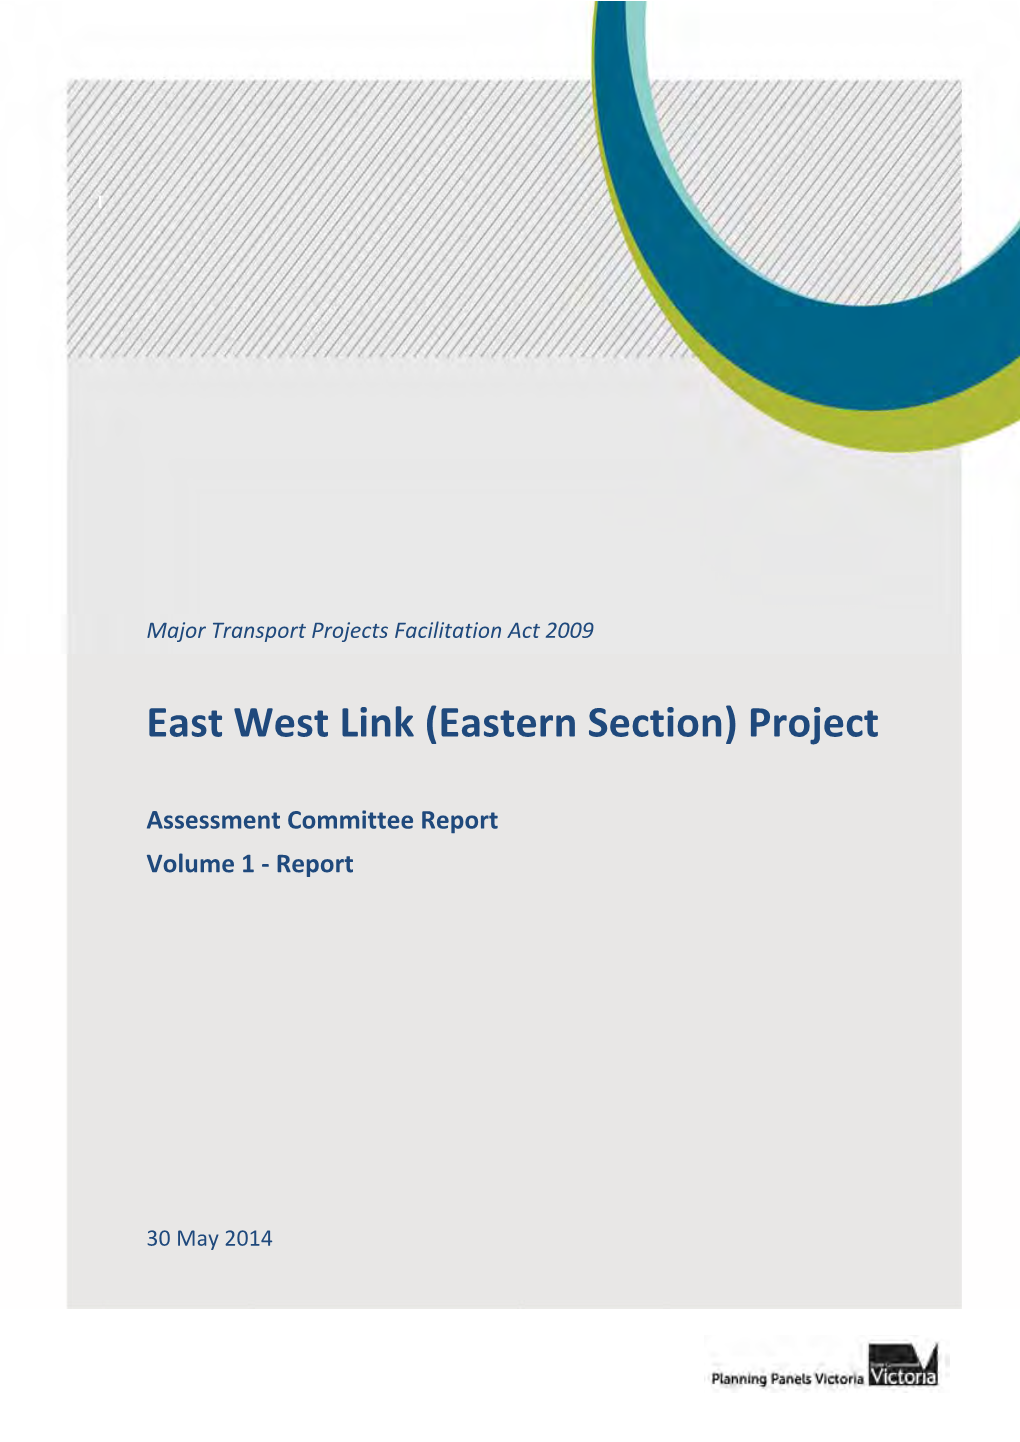 East West Link (Eastern Section) Project